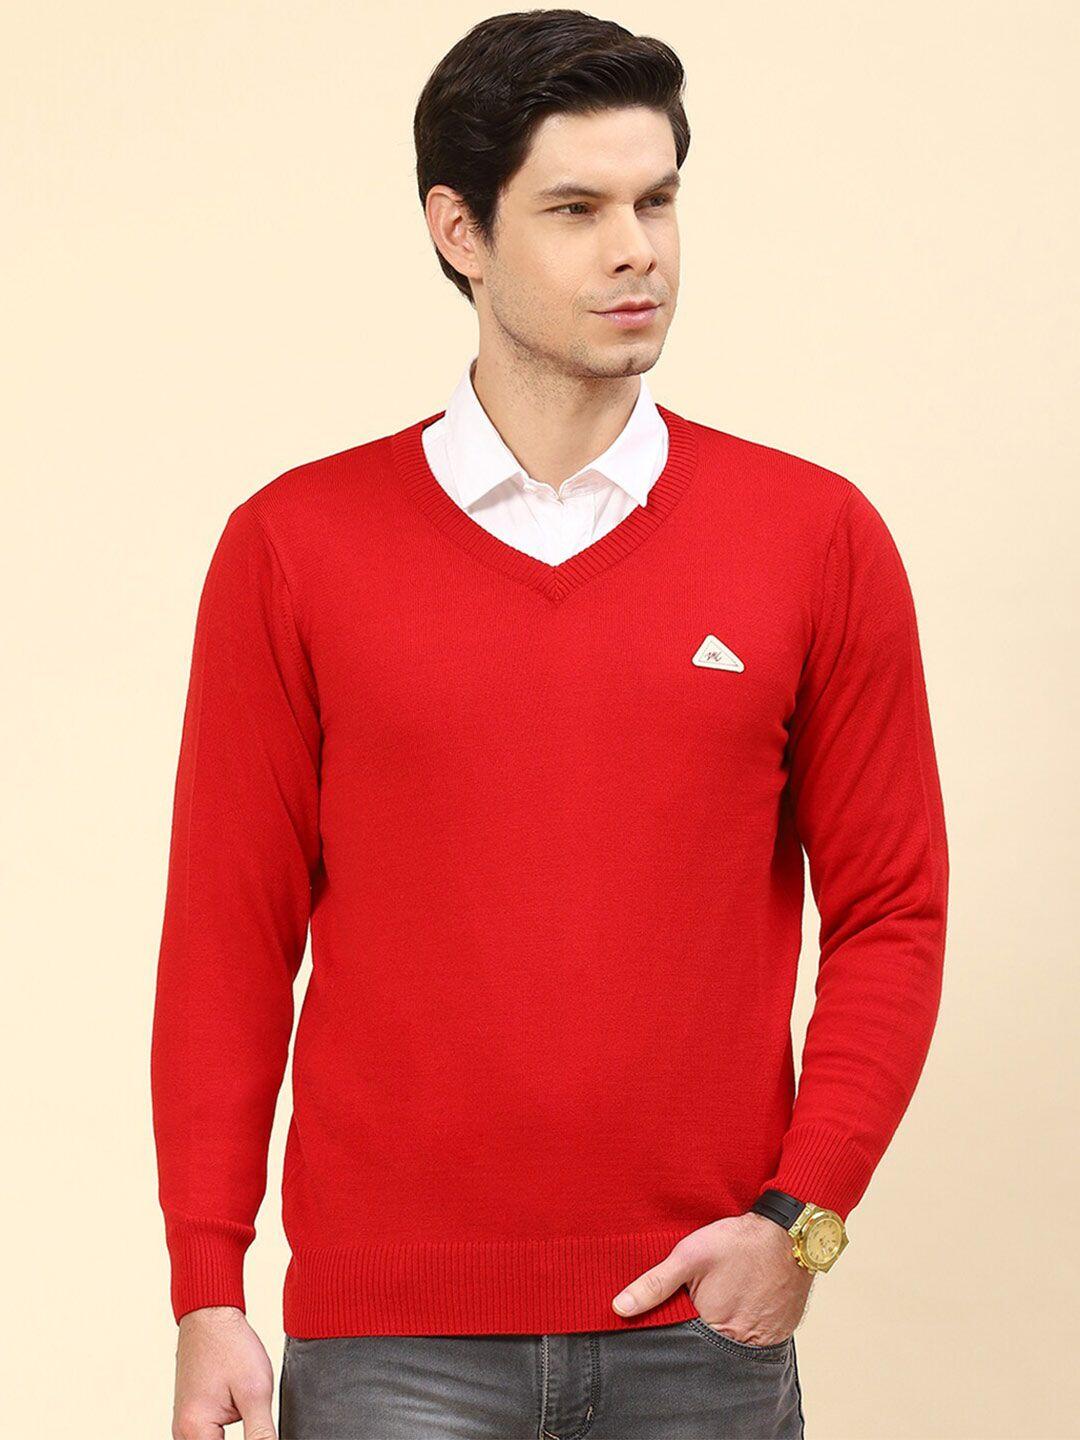 monte-carlo-v--neck-ribbed-knitted-pullover